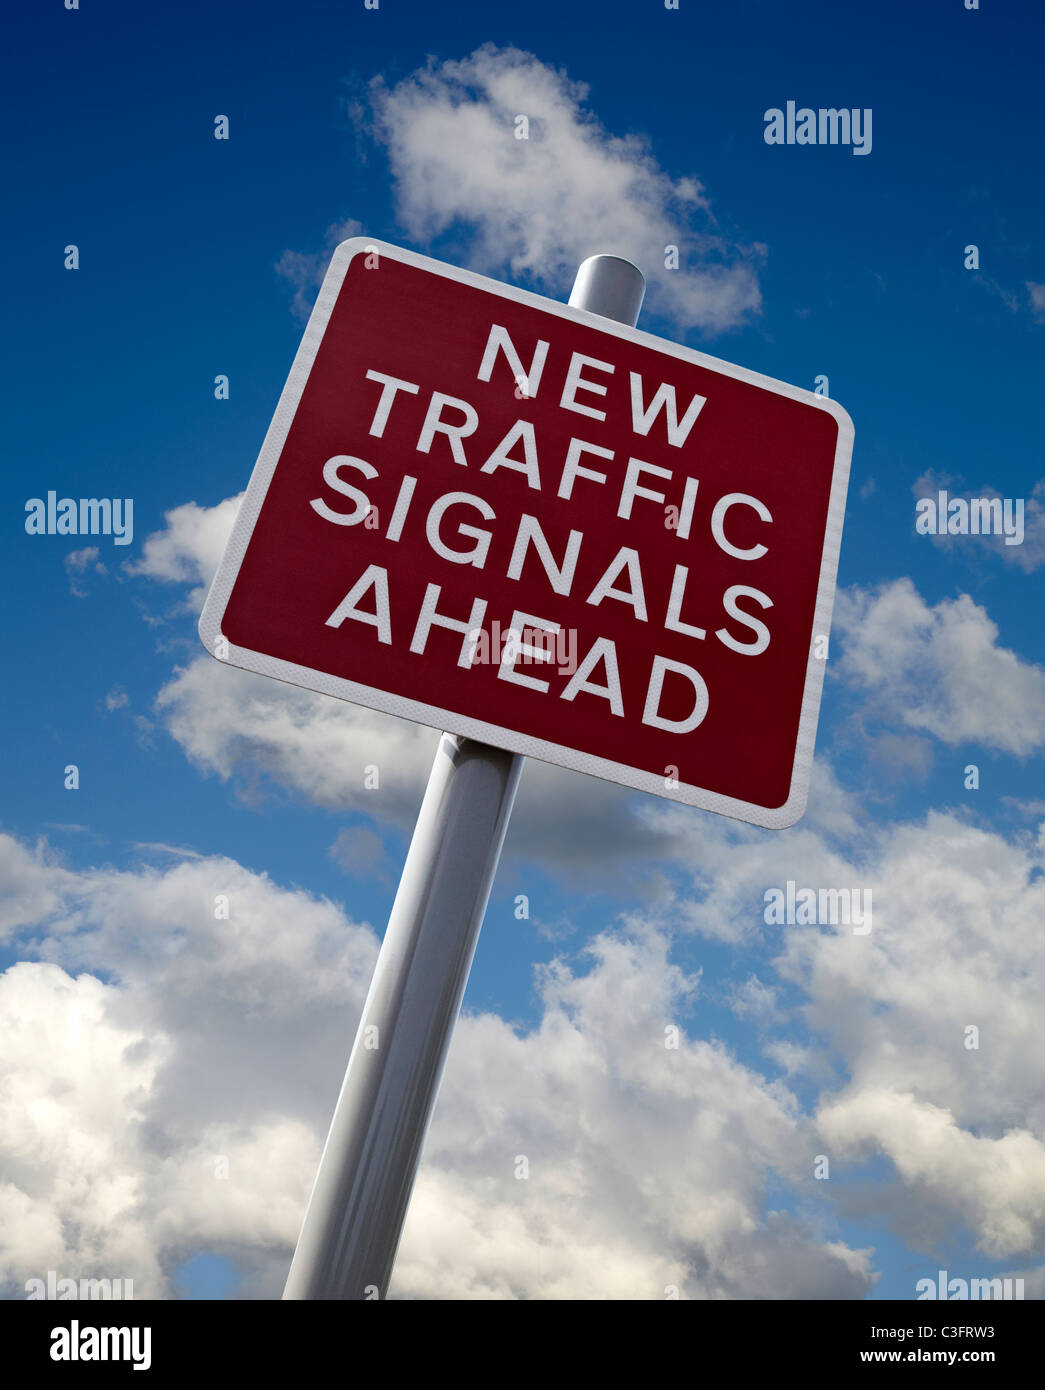 New Traffic signals ahead sign in England. Cut out against a Blue sky with white clouds. Stock Photo